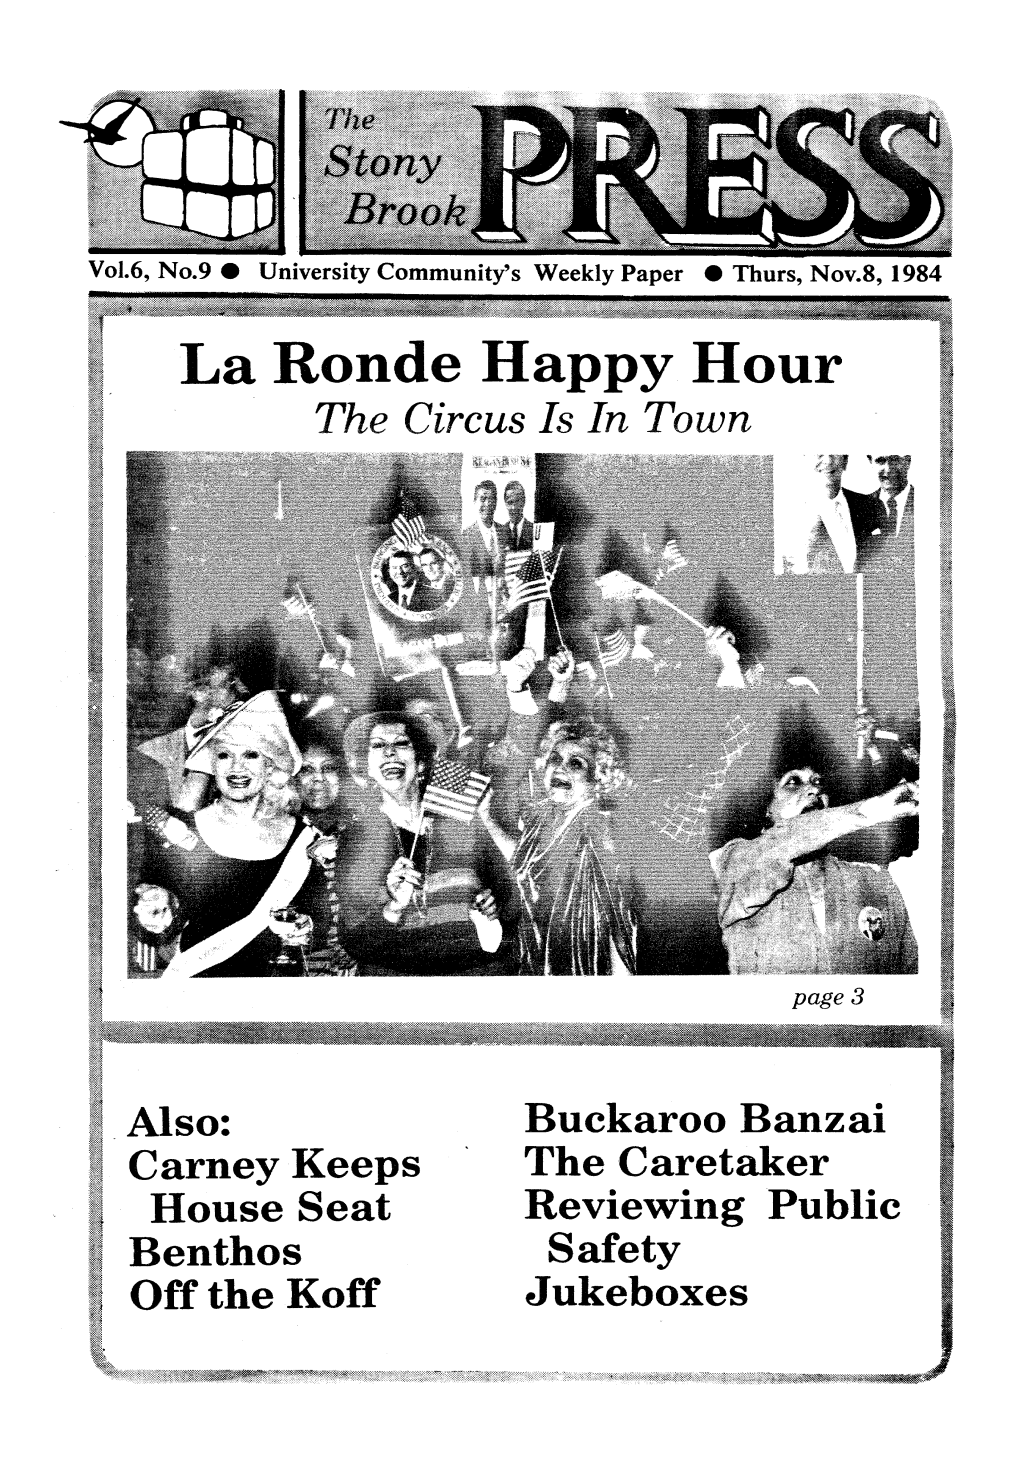 La Ronde Happy Hour the Circus Is in Town